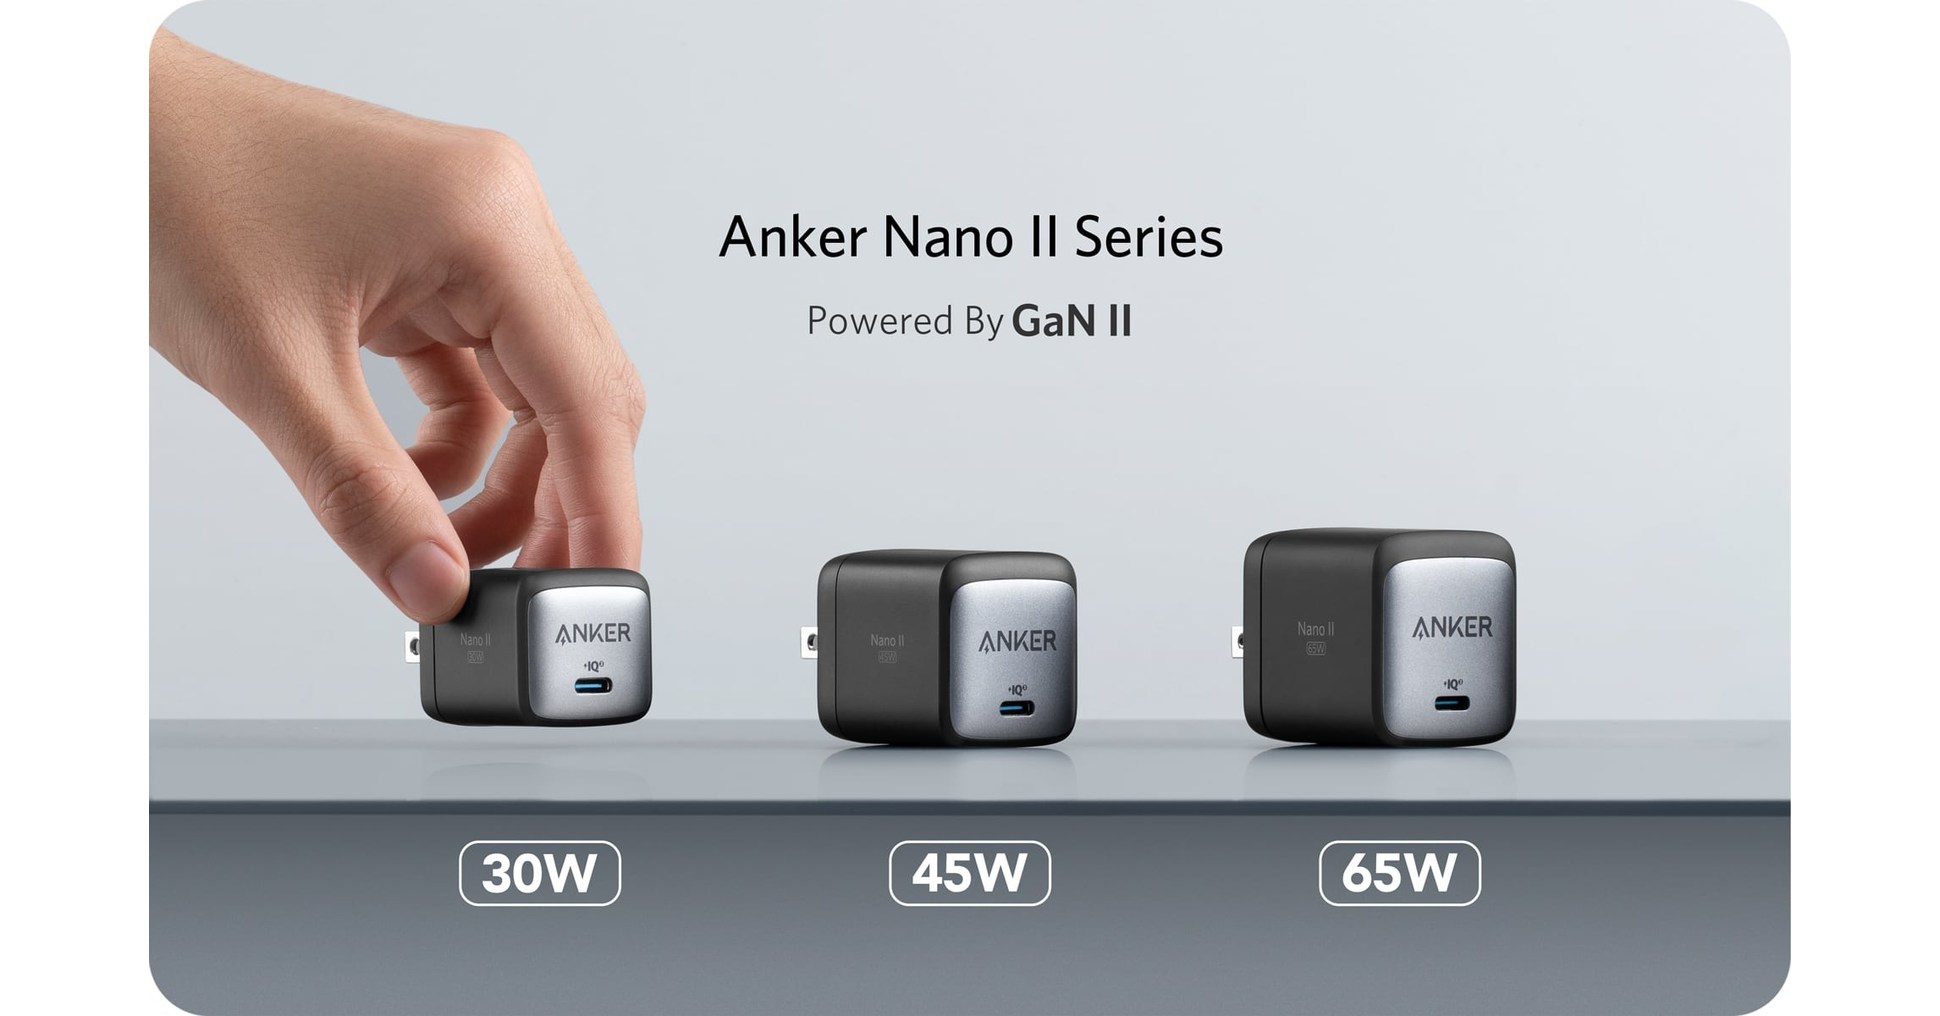 Vurdering Smuk kvinde Necklet Anker Launches Nano II Charger series powered by Gan II Technology